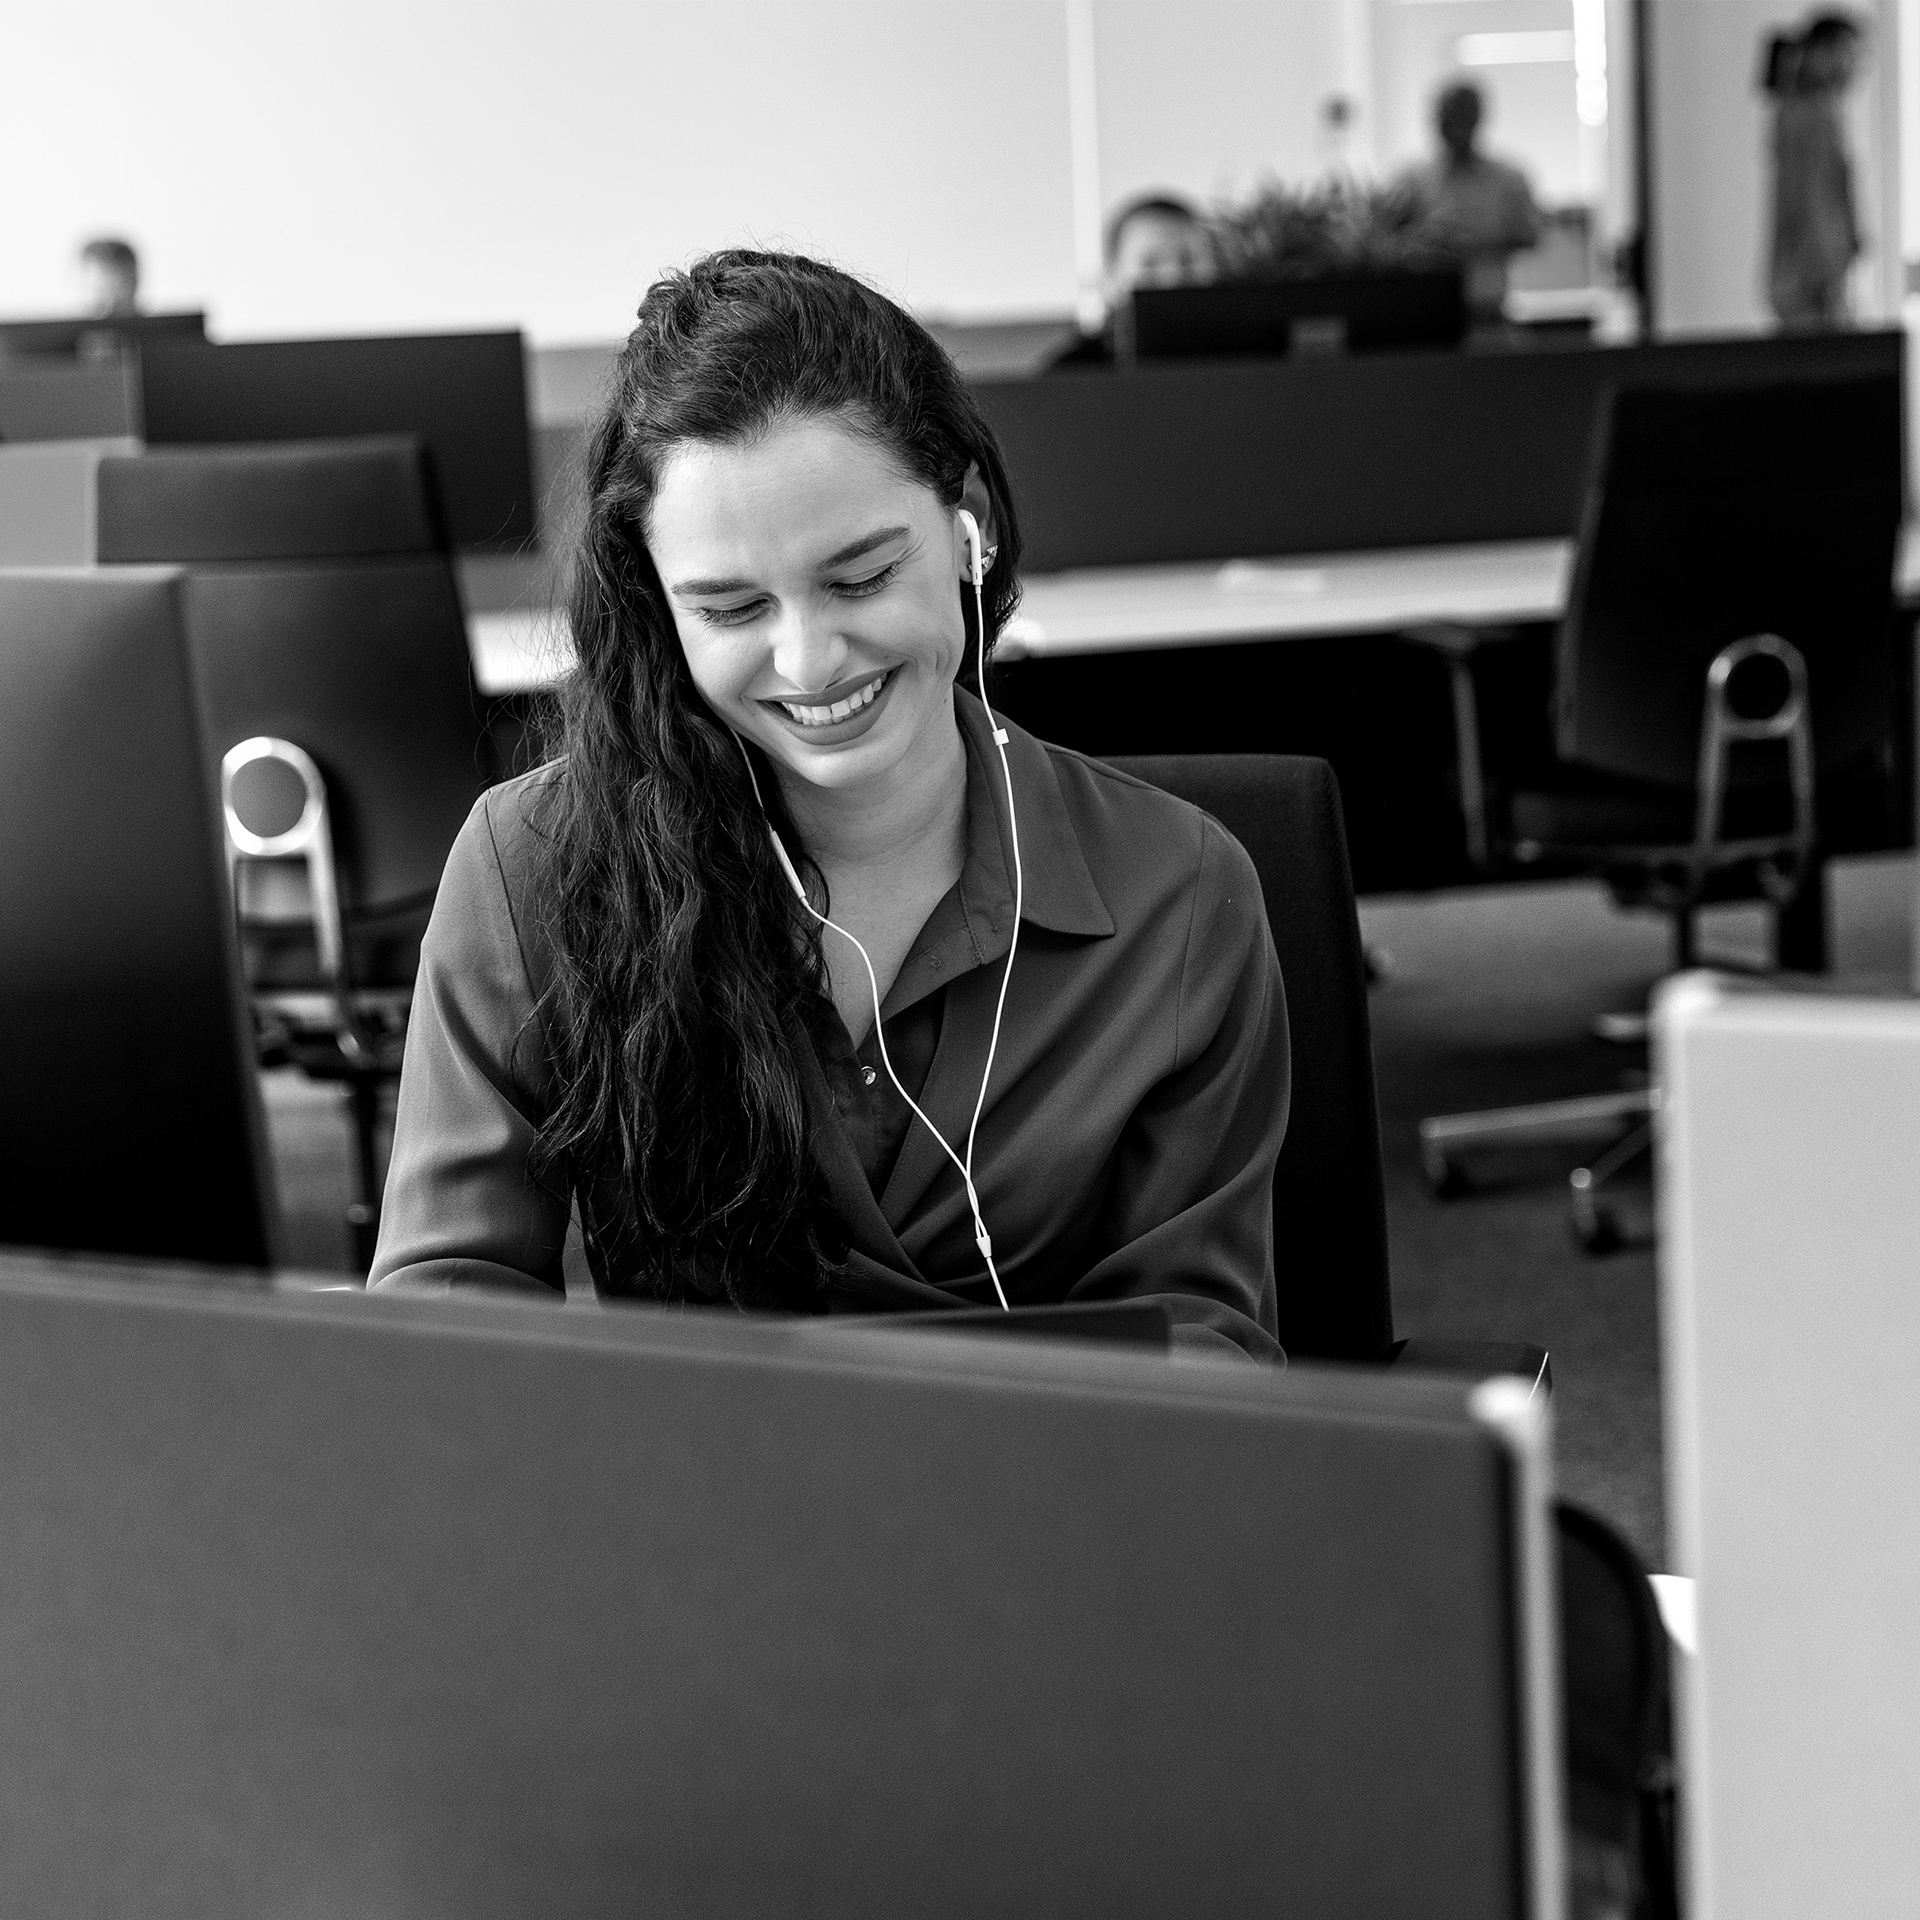 woman sitting at desk with headphones smiling